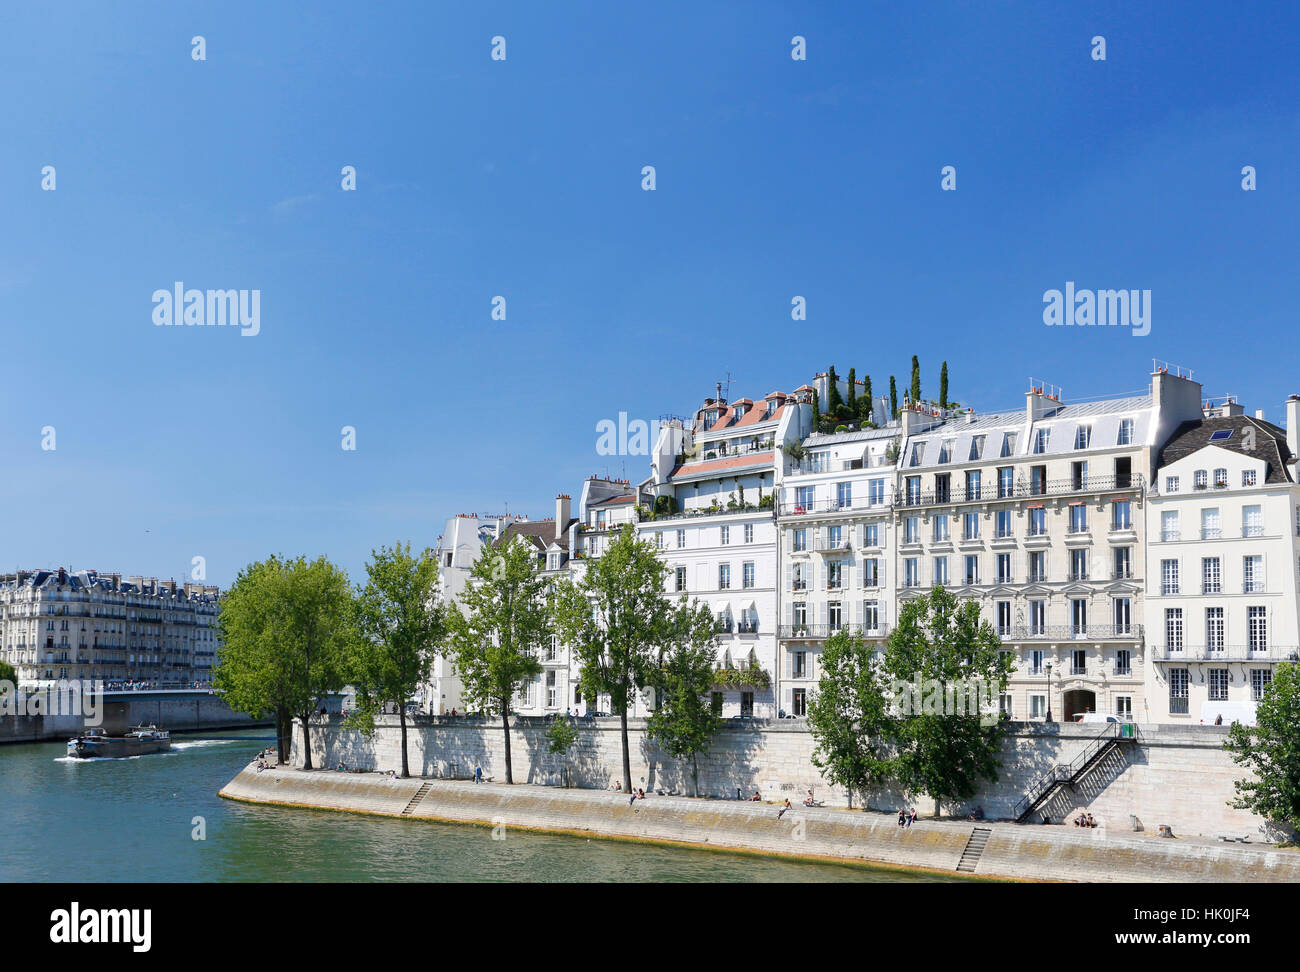 France, Paris. 4th arrondissement. The Ile Saint Louis. The Seine in the foreground. Stock Photo